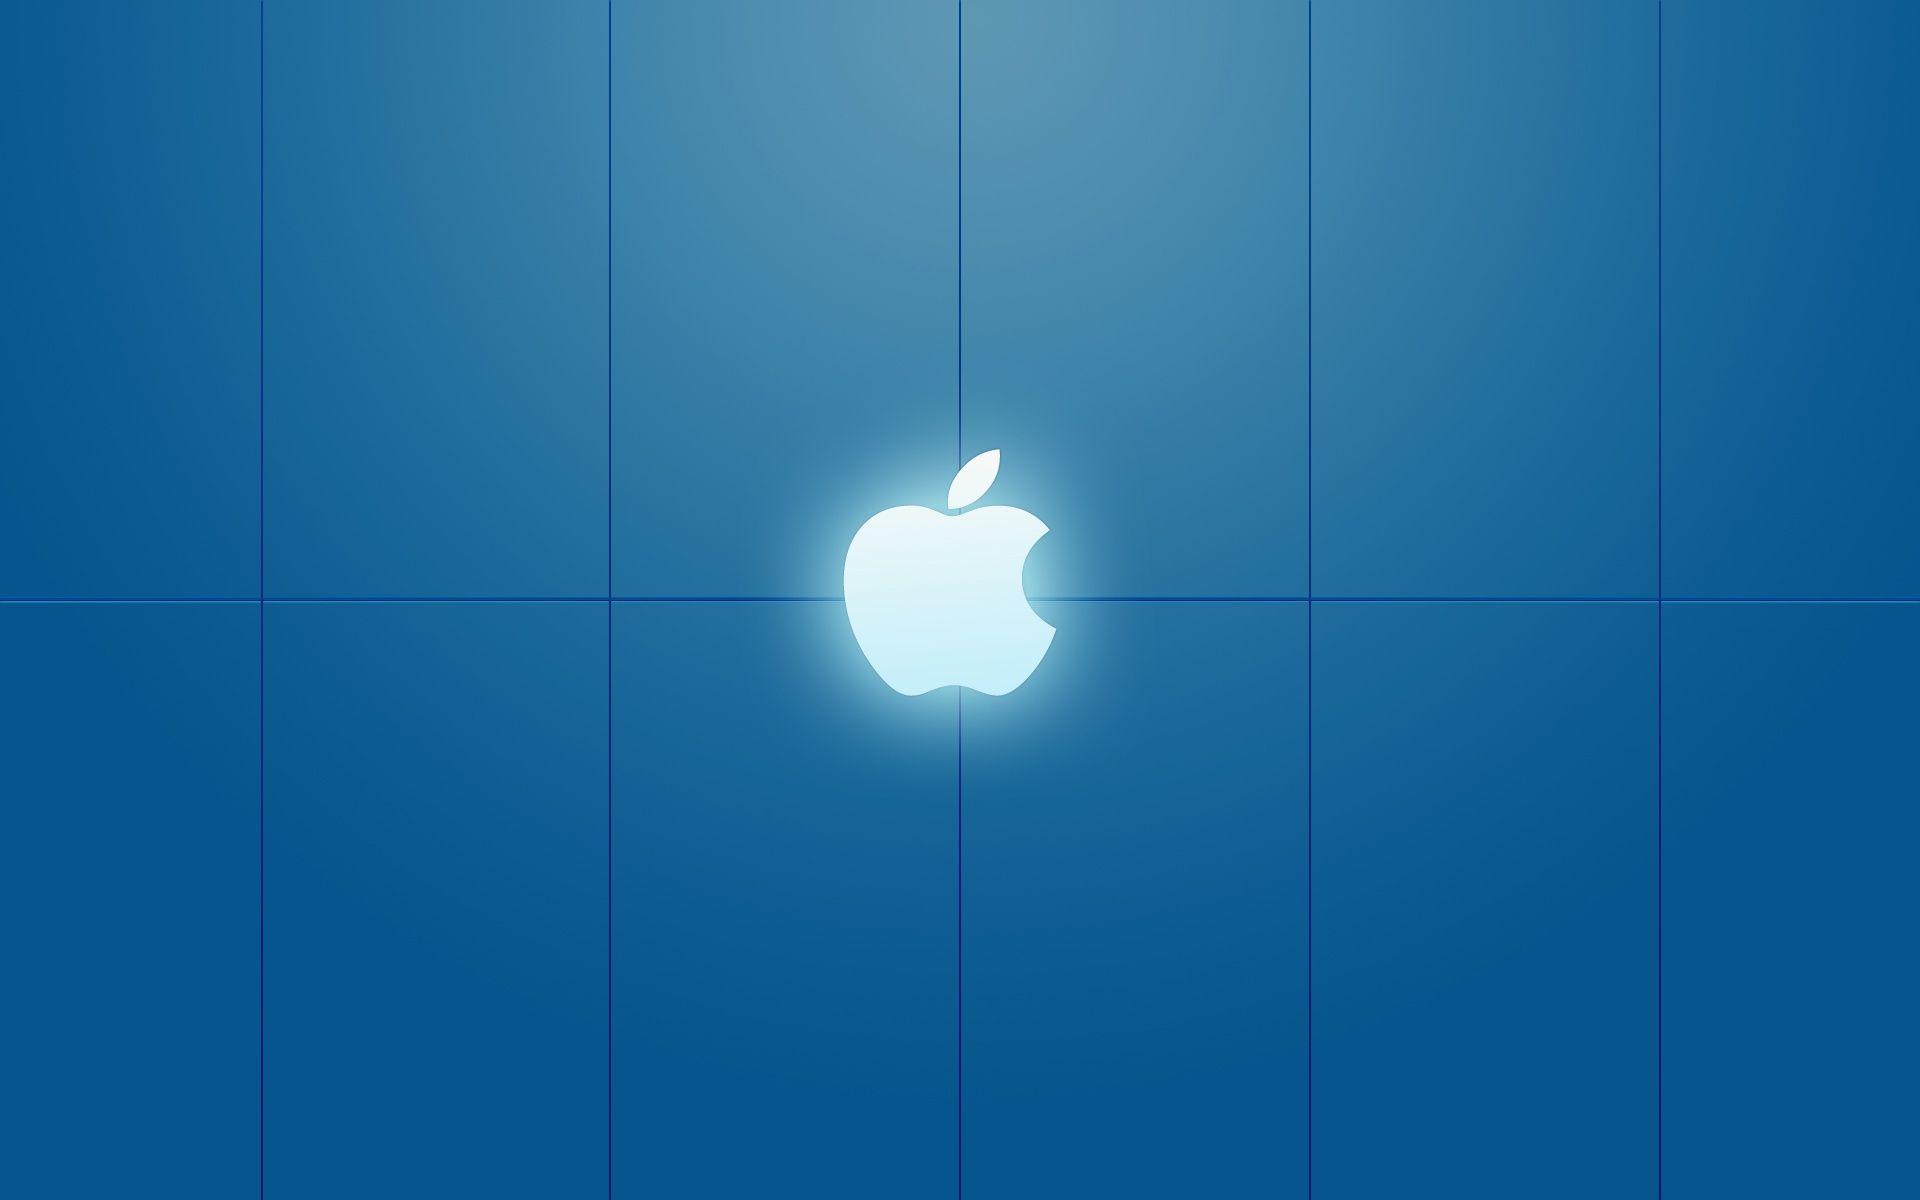 Apple Logo on Blue Background wallpaper. brands and logos